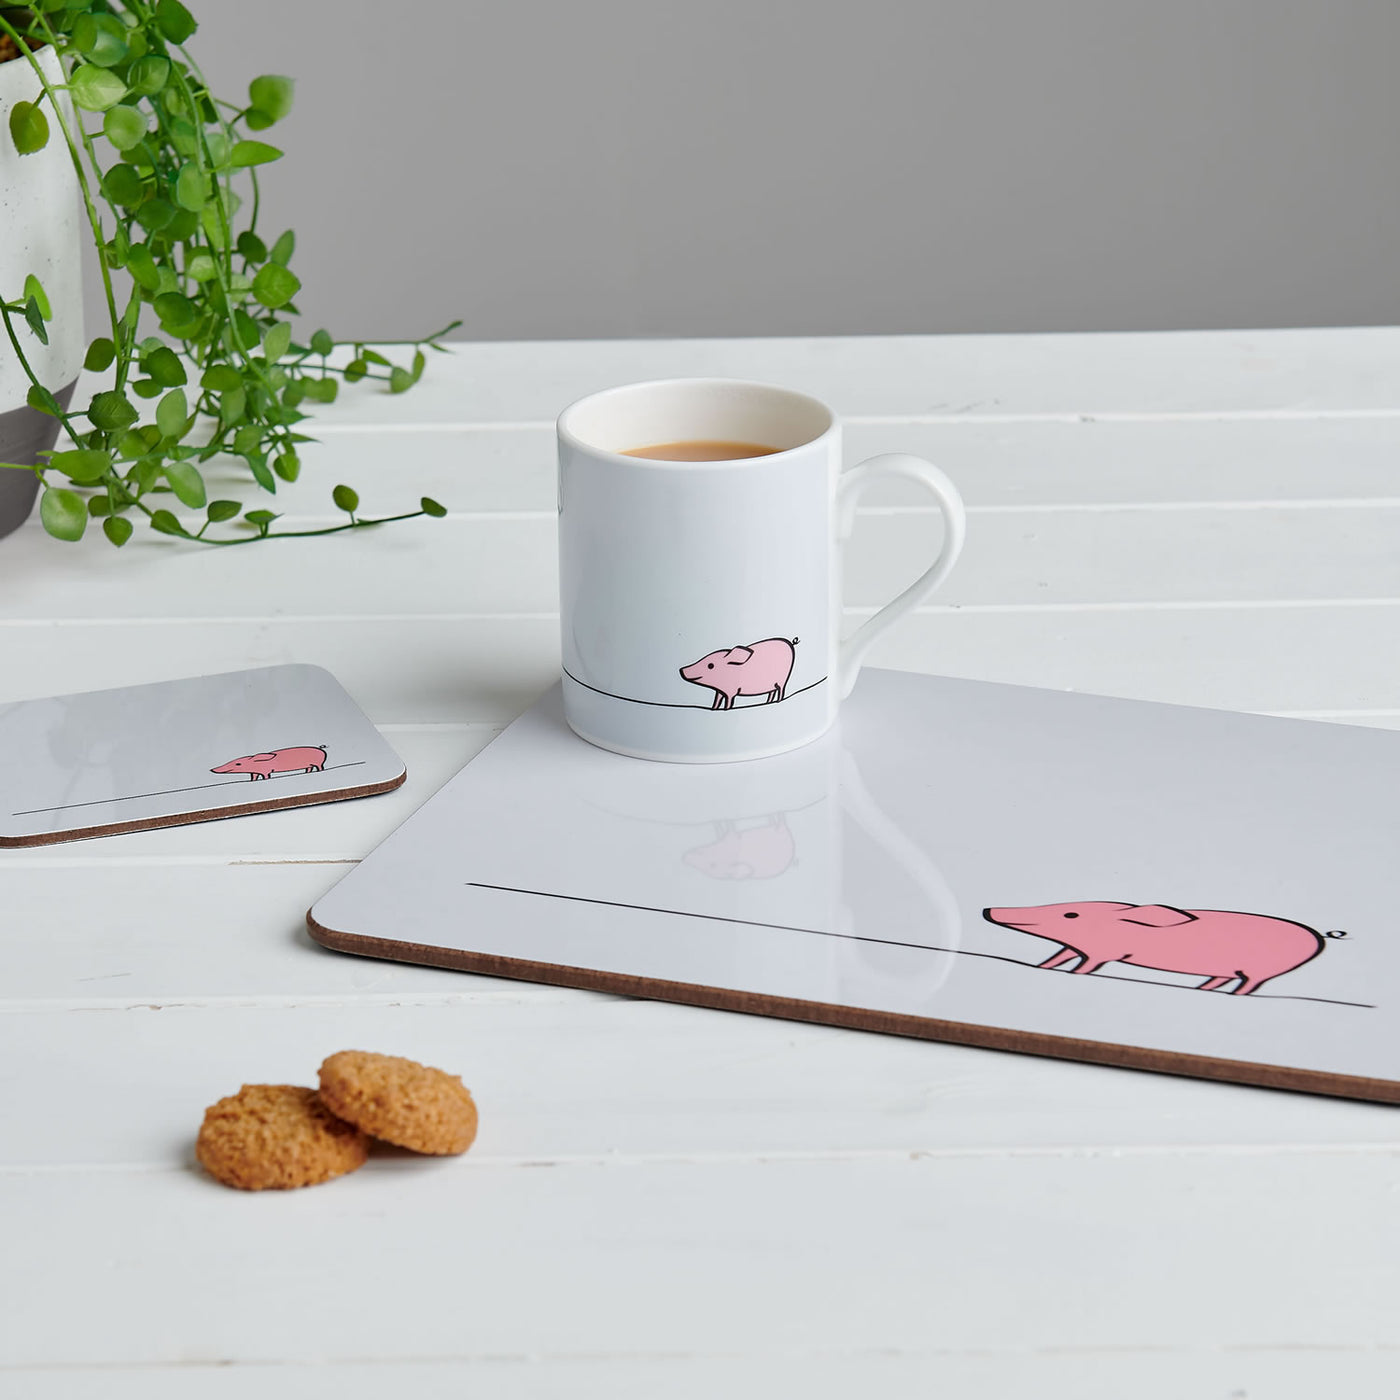 The Pig Collection featuring mug, placemat and coasters